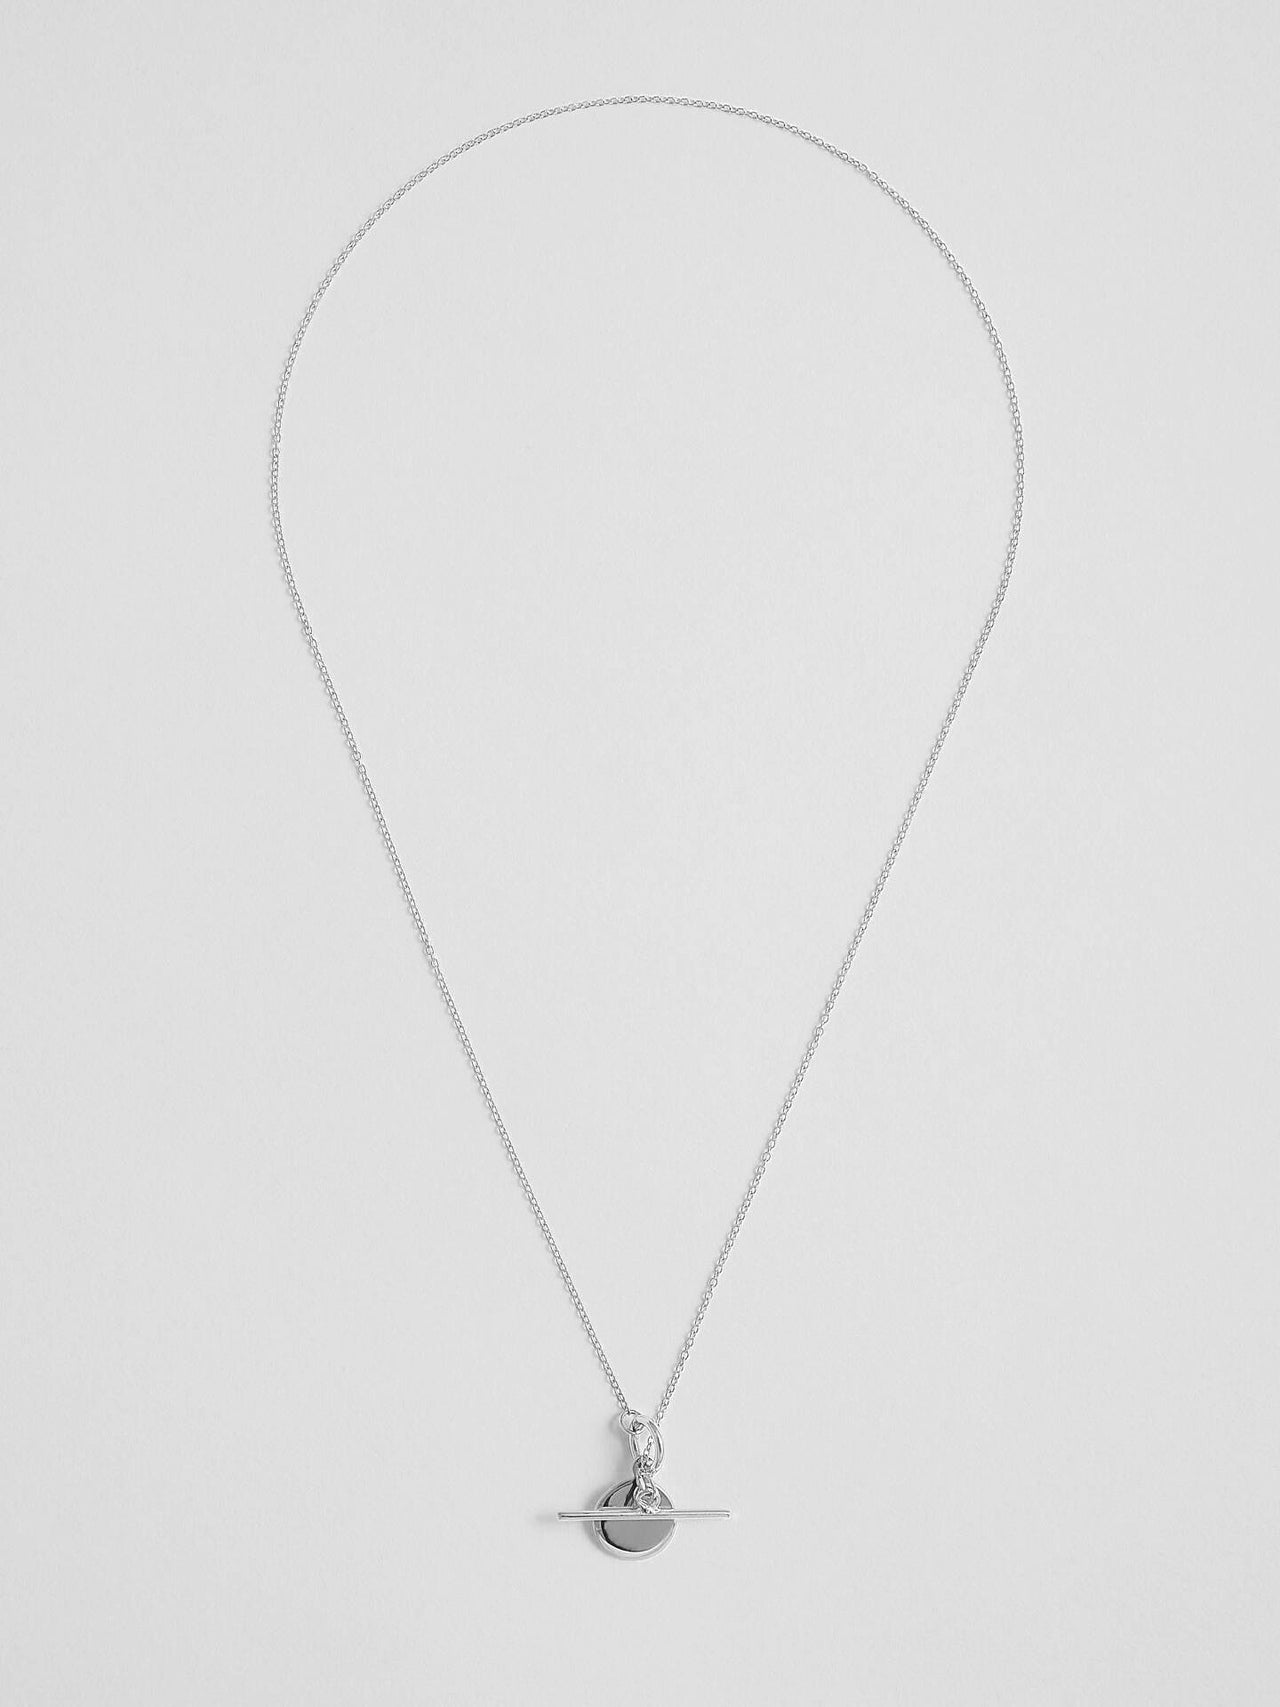 Sterling Silver Mini Disk and Toggle Necklace pictured on light grey background. 